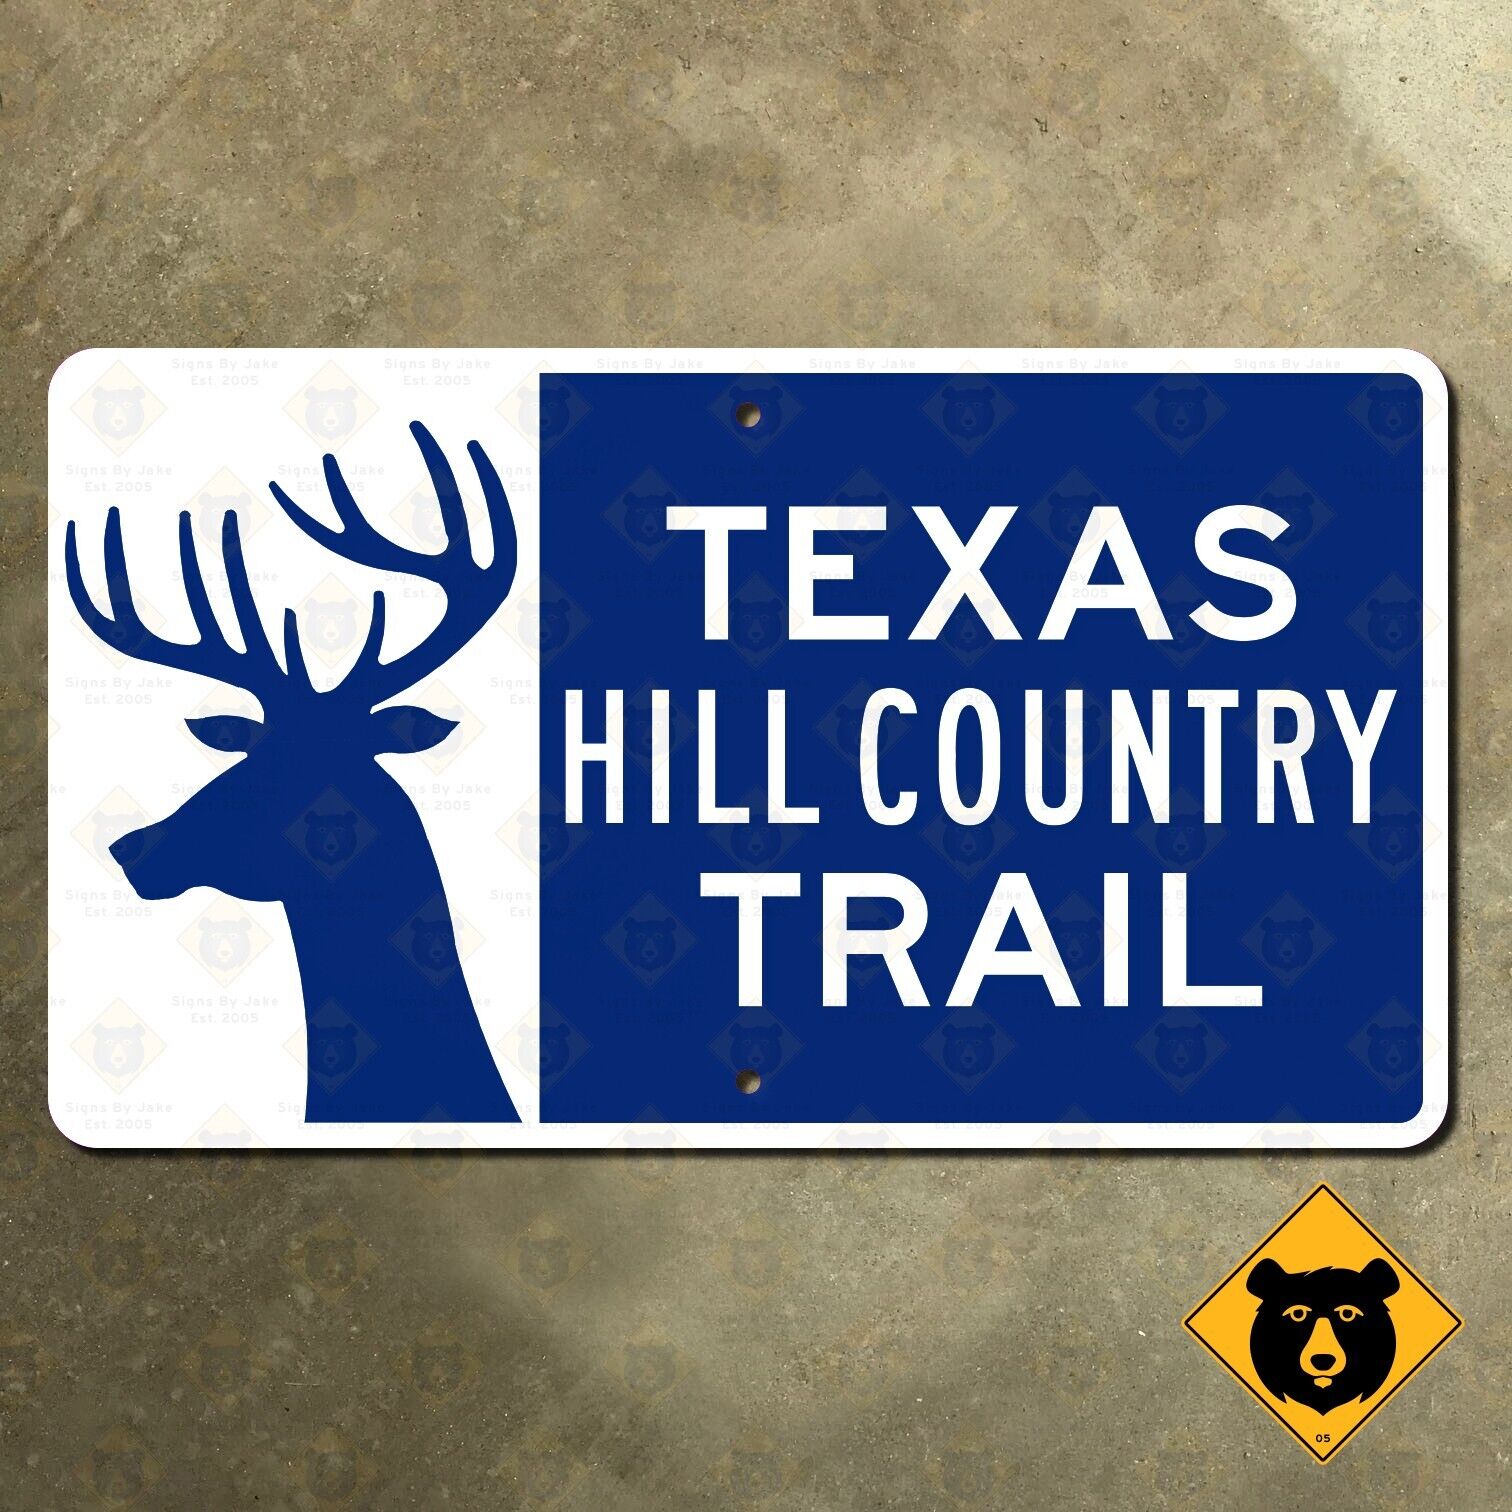 Texas Hill Country Trail highway road sign scenic route Heritage deer 1998 21x12